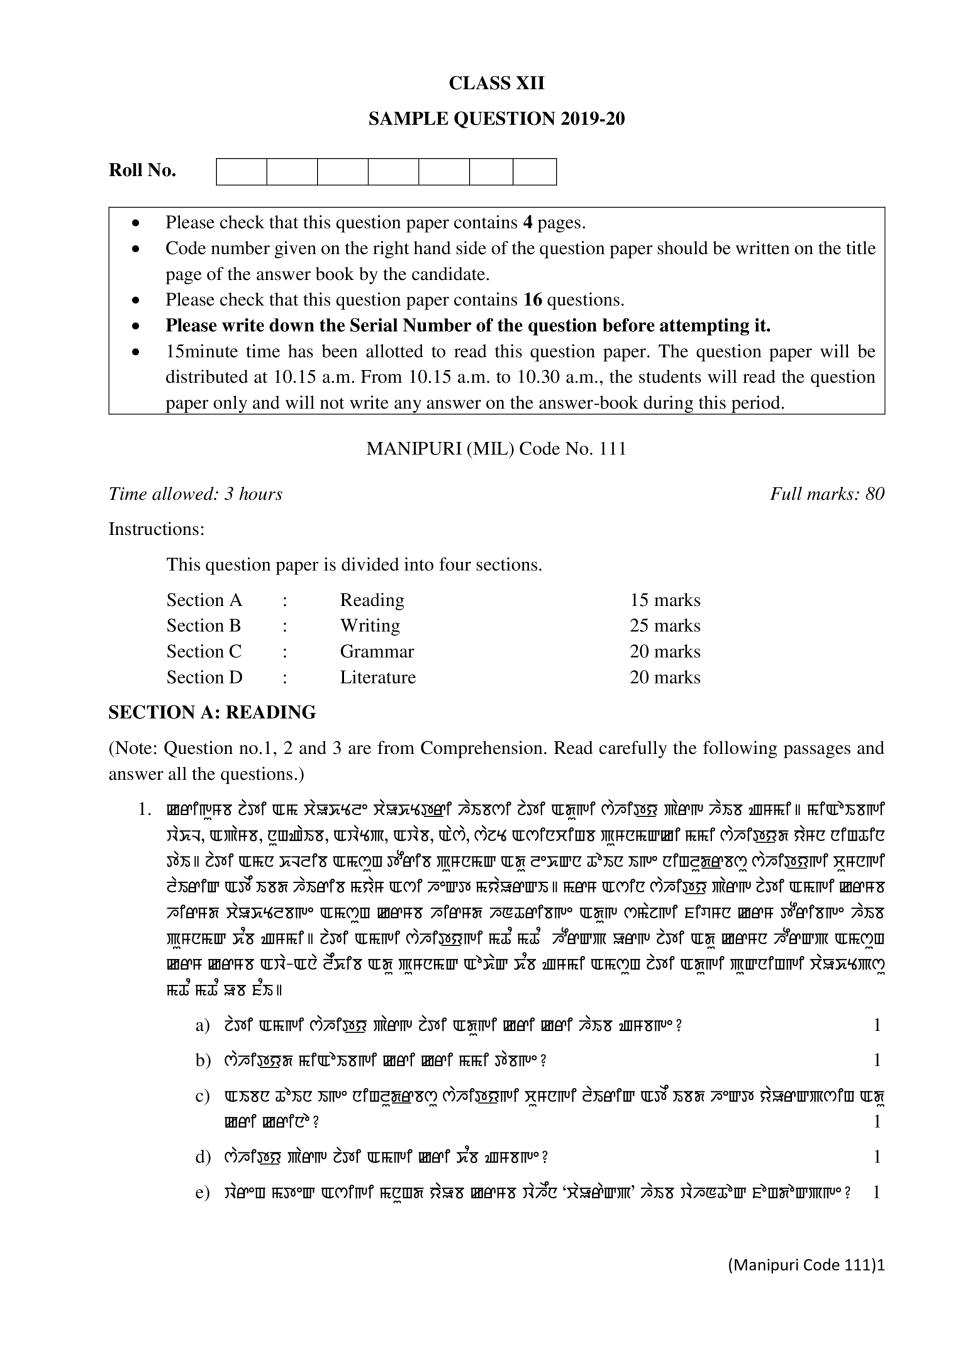 CBSE Class 12 Sample Paper 2020 for Manipuri - Page 1